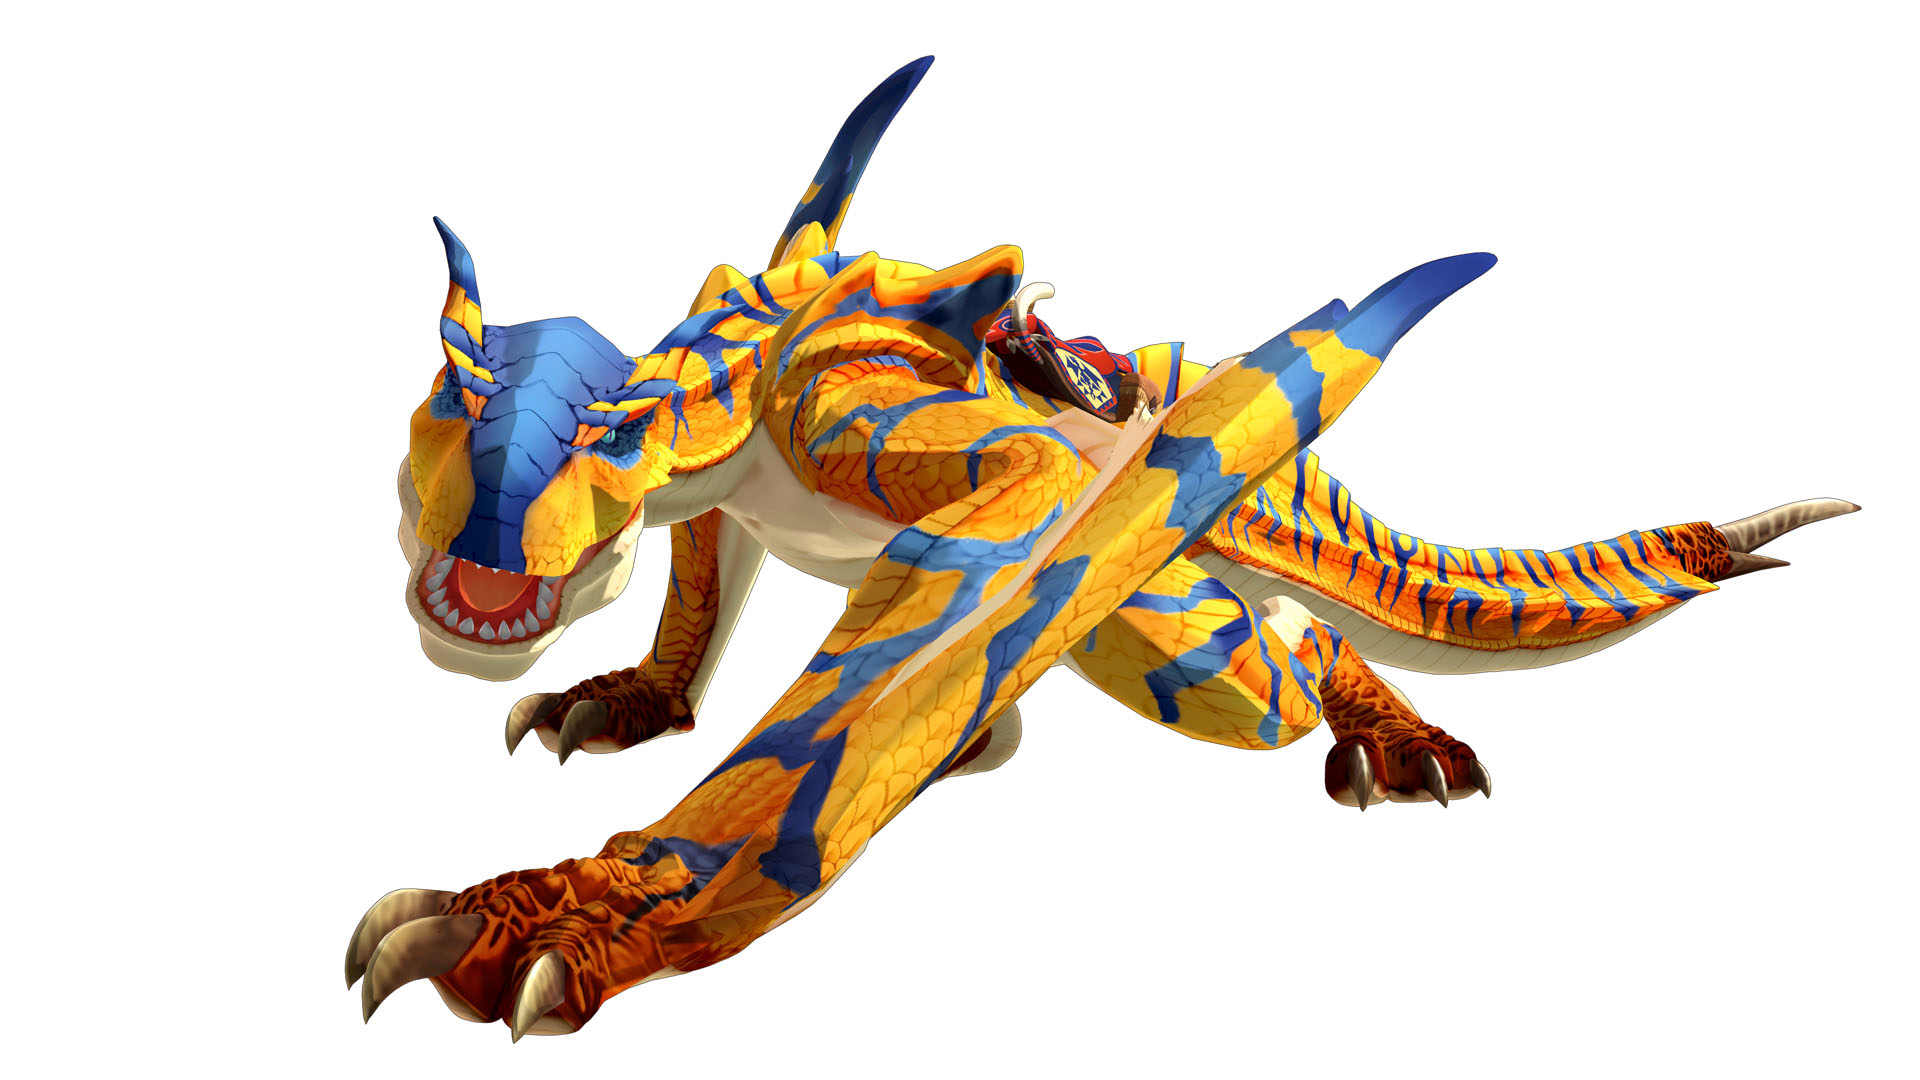 monster-hunter-stories-2-gets-tons-of-screenshots-art-gameplay-from-upcoming-demo